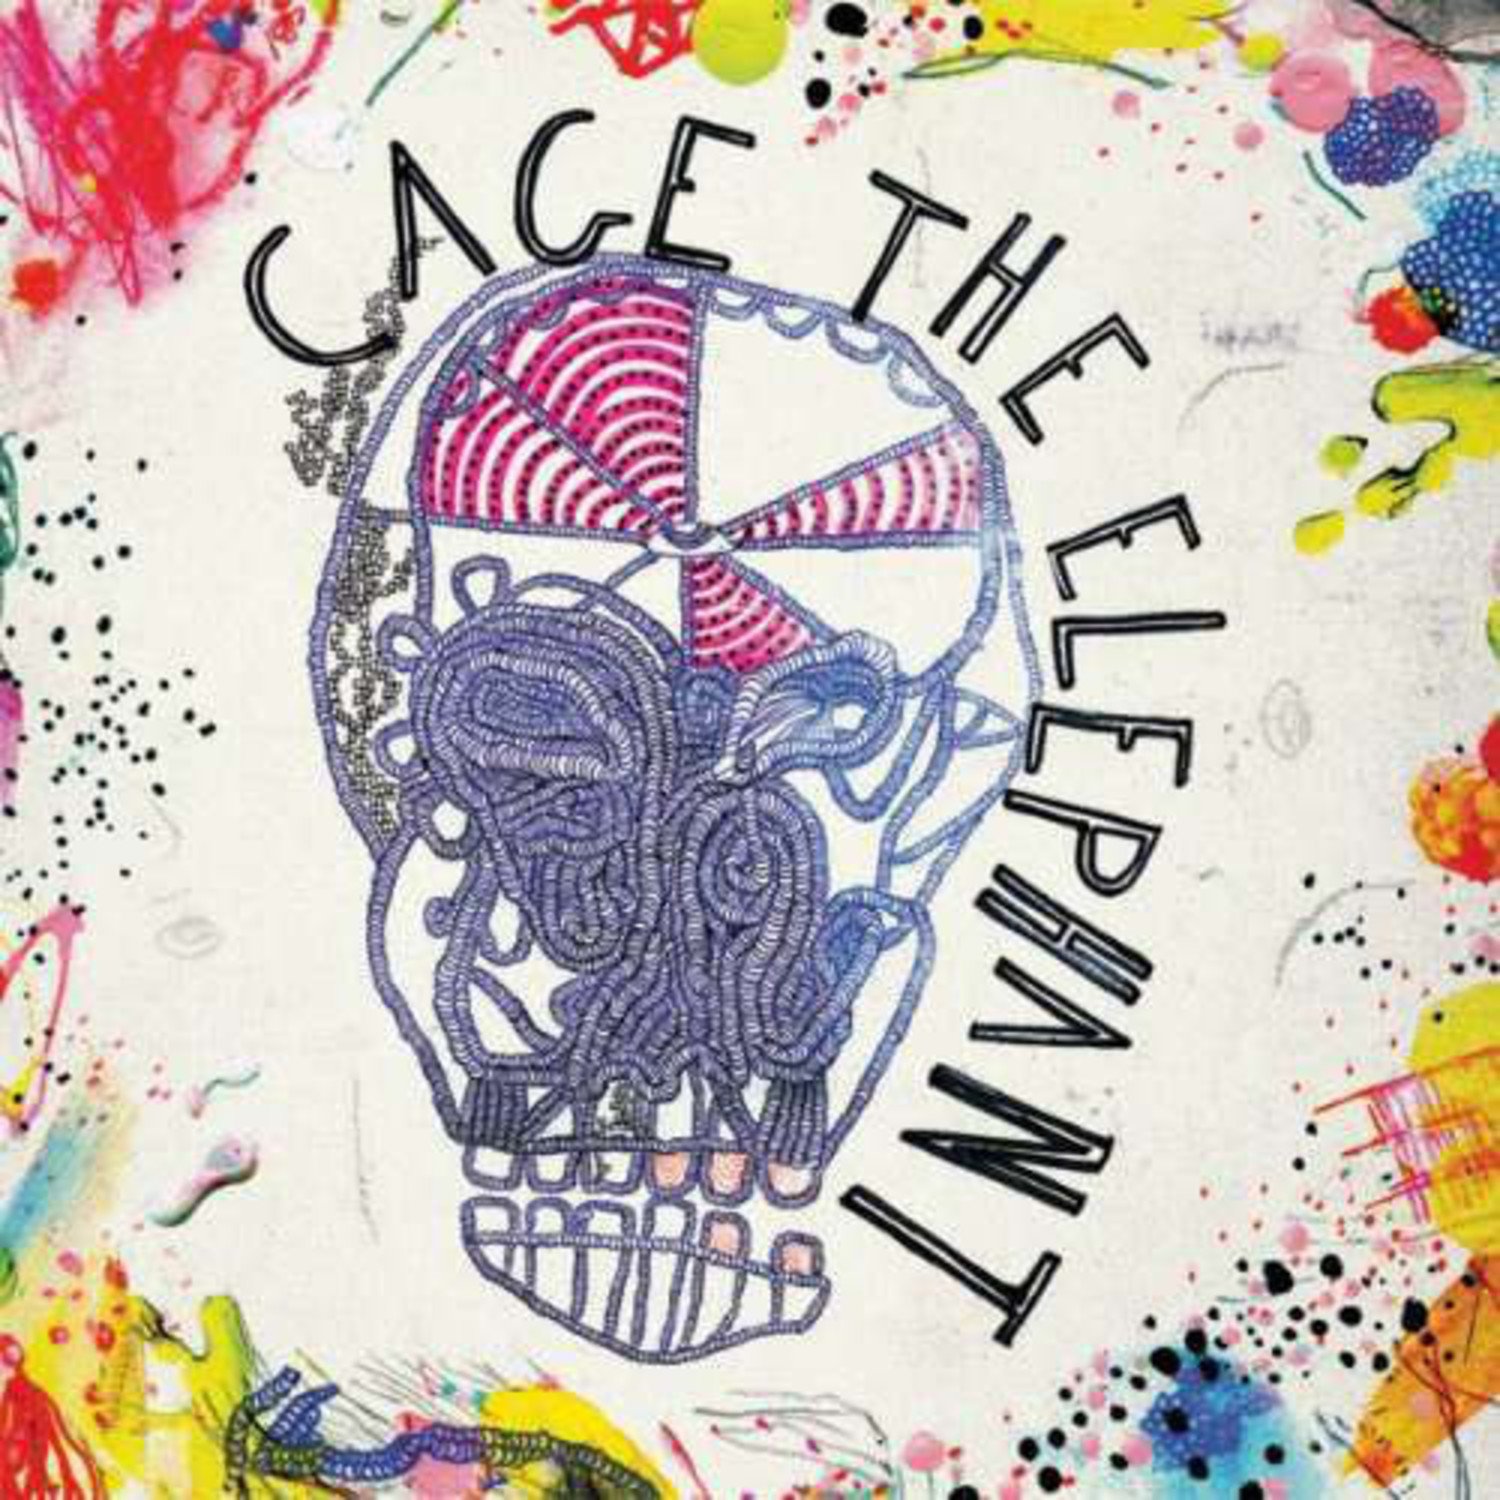 Cage The Elephant - Cage the Elephant LP - Wax Trax Records